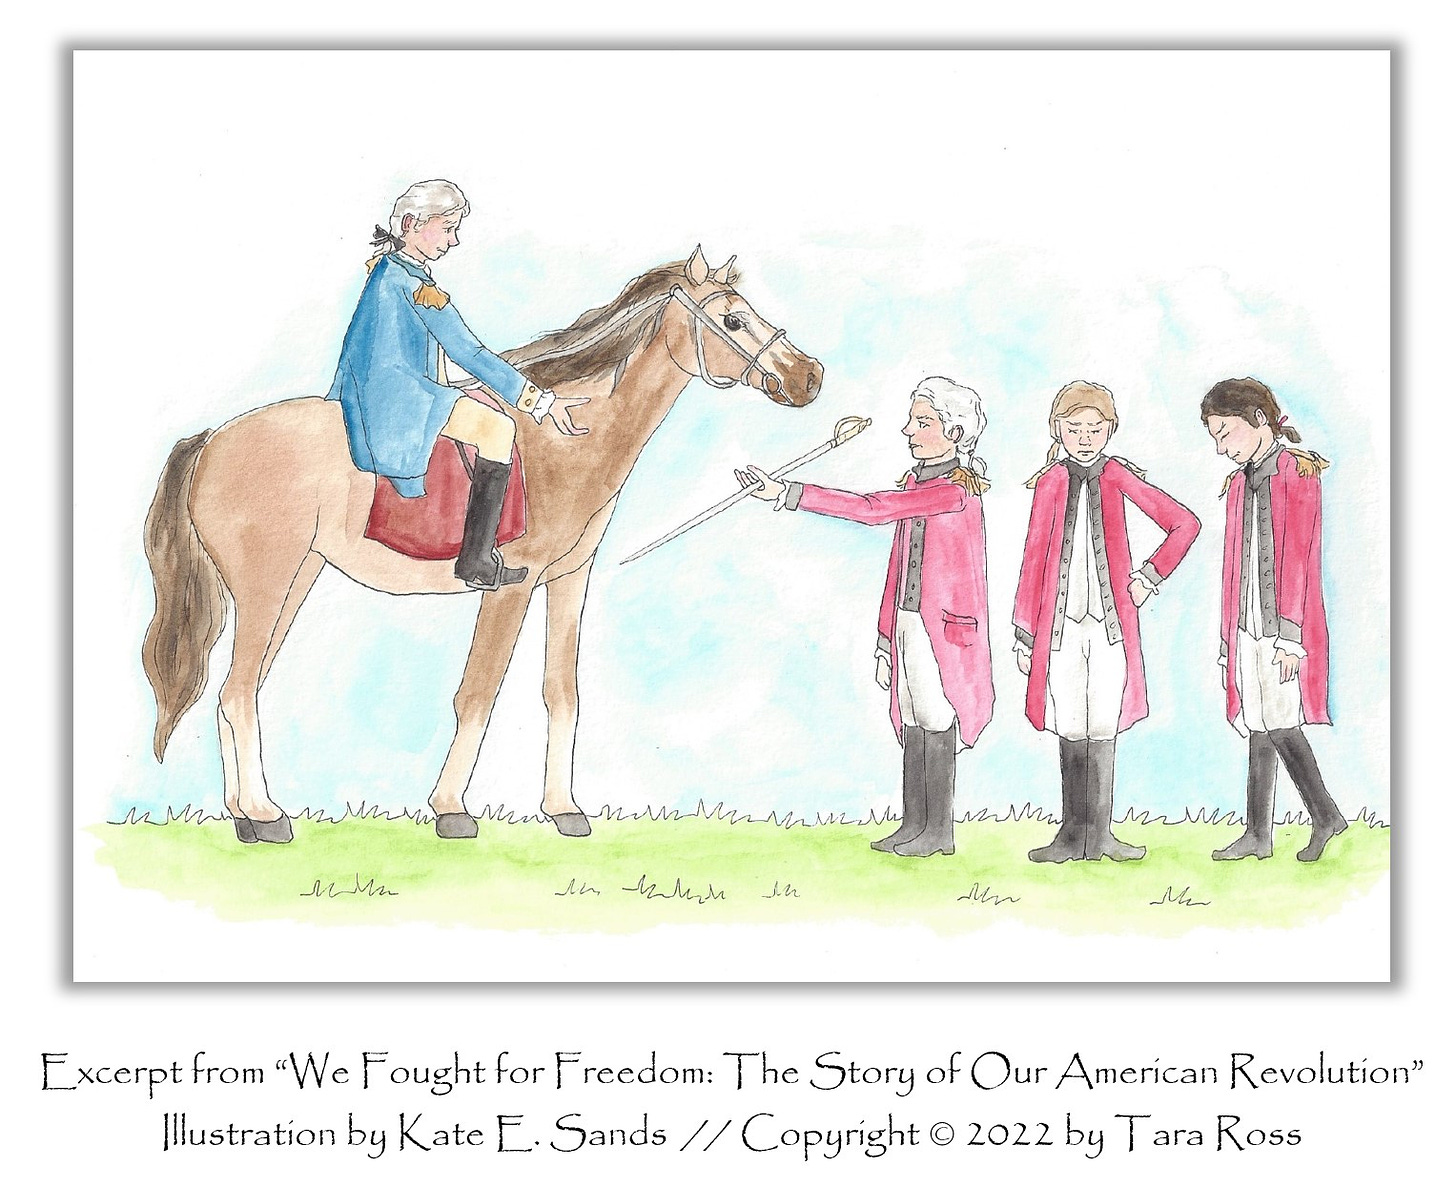 Excerpt from "We Fought for Freedom: The Story of Our American Revolution" by Tara Ross. Illustration by Kate E. Sands of the Surrender at Yorktown.